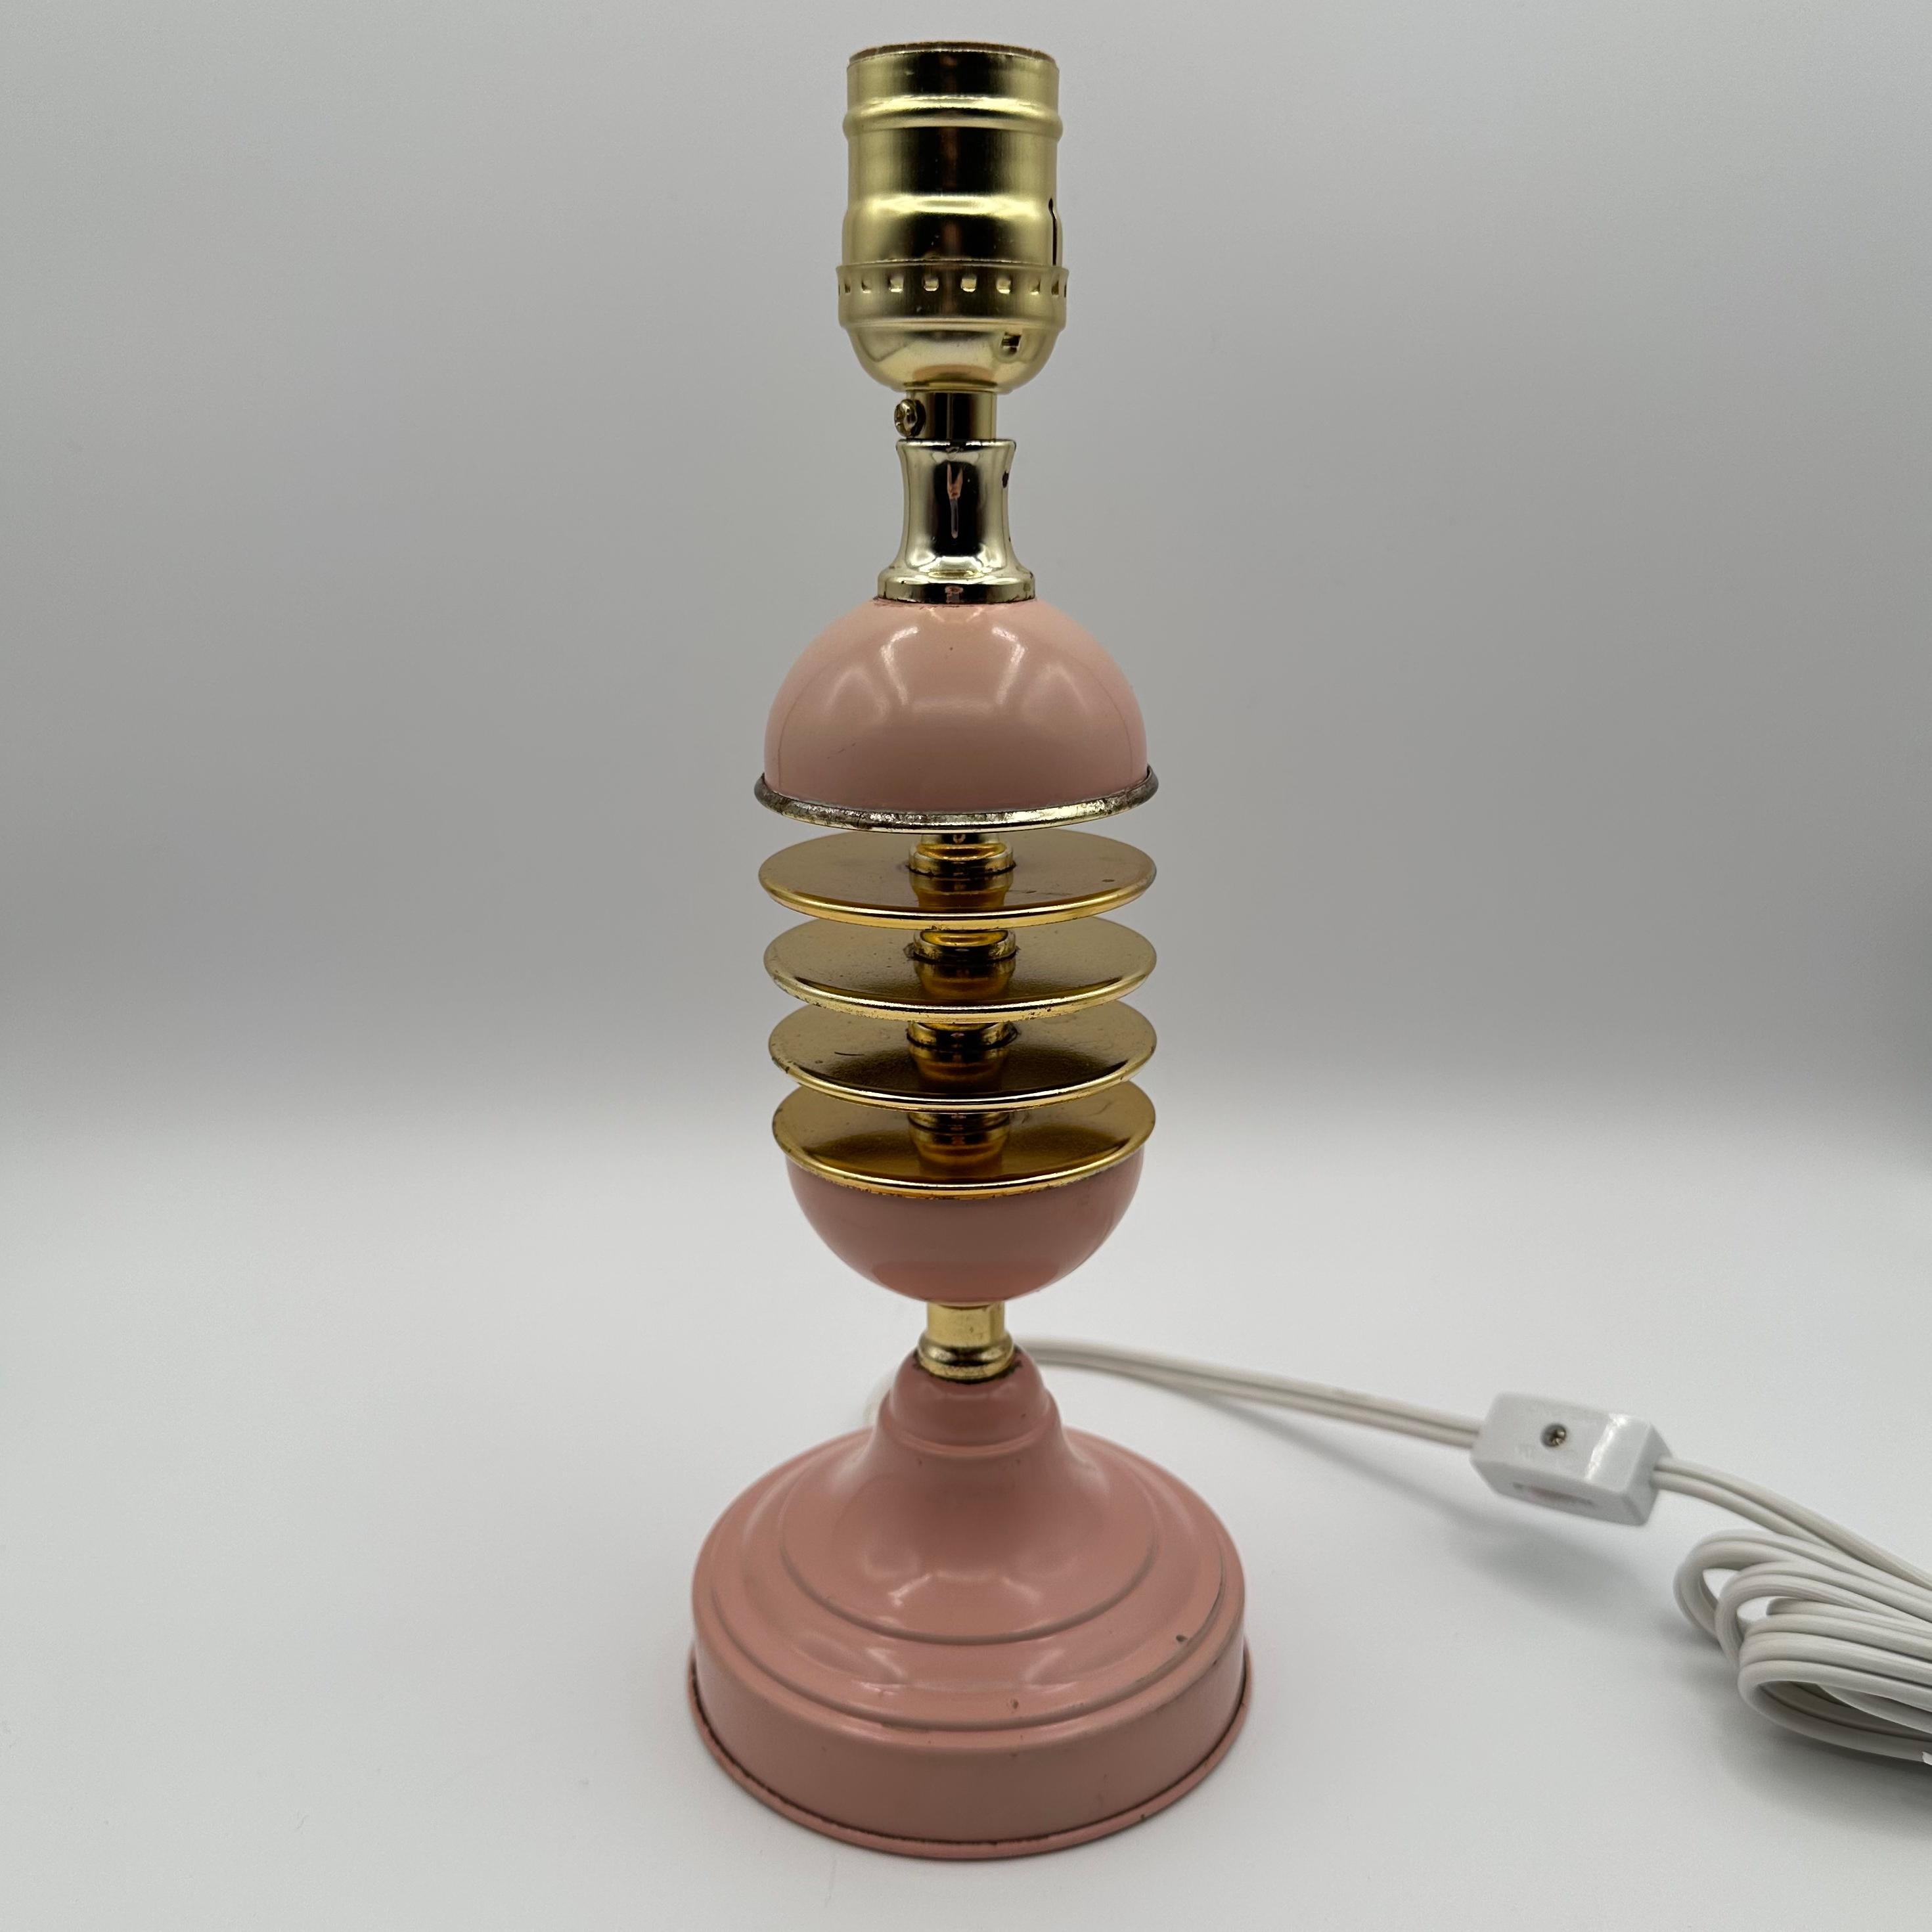 Vintage table lamp in pink and brass with a body comprised of round floating discs suspended in levels between brass pieces. Reminiscent of a hasselback potato, this charming lamp is a charming feminine touch. 

Please review photos carefully; this